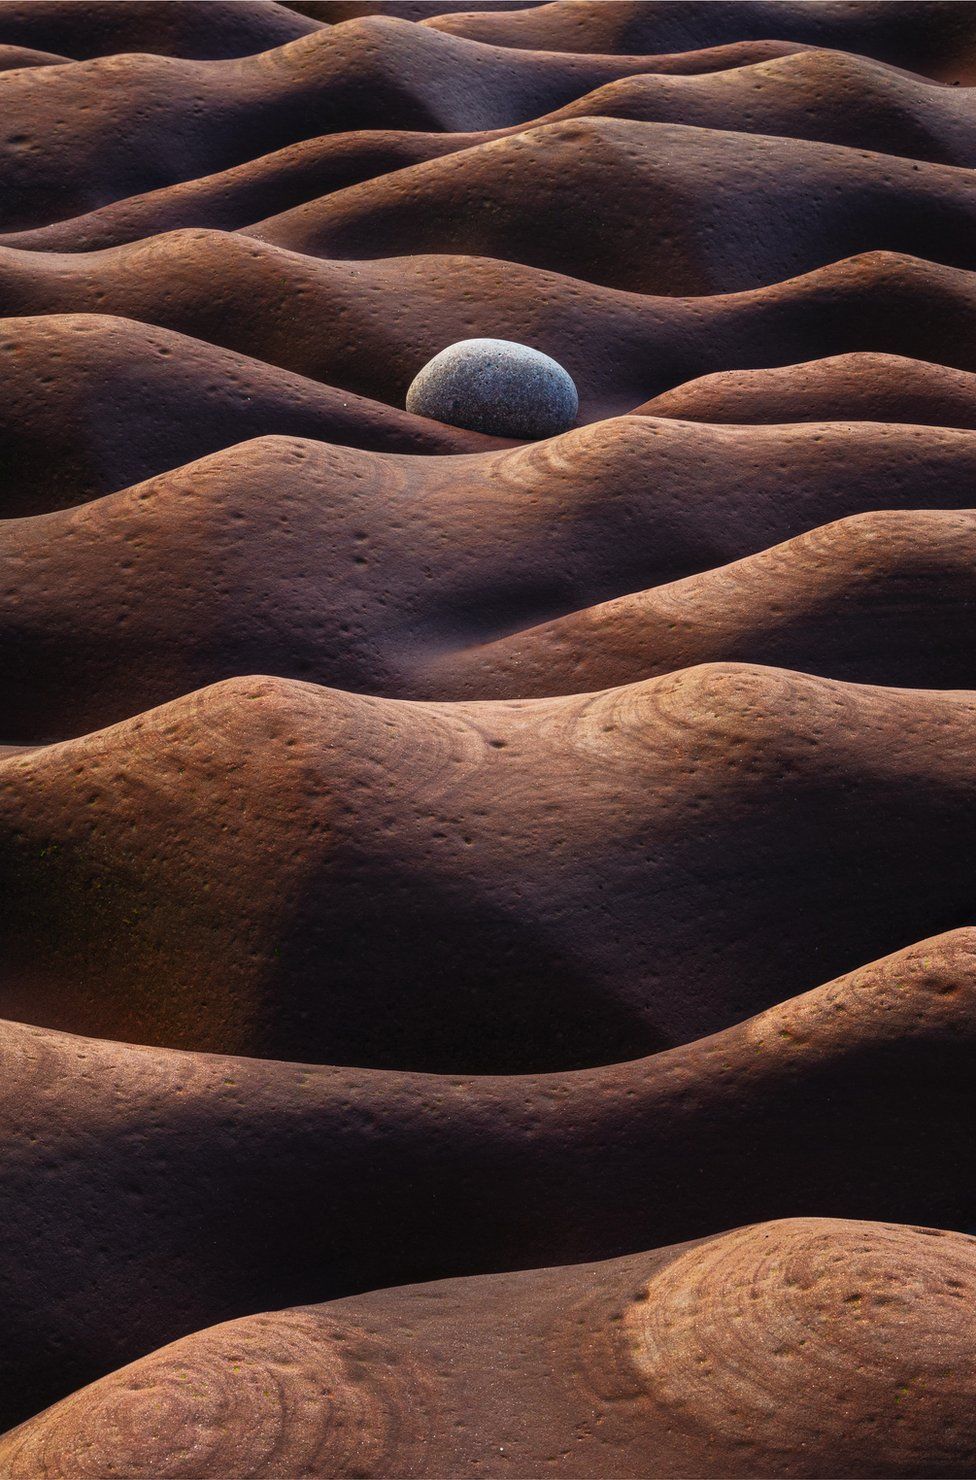 A photo showing a stone on an undulating ground